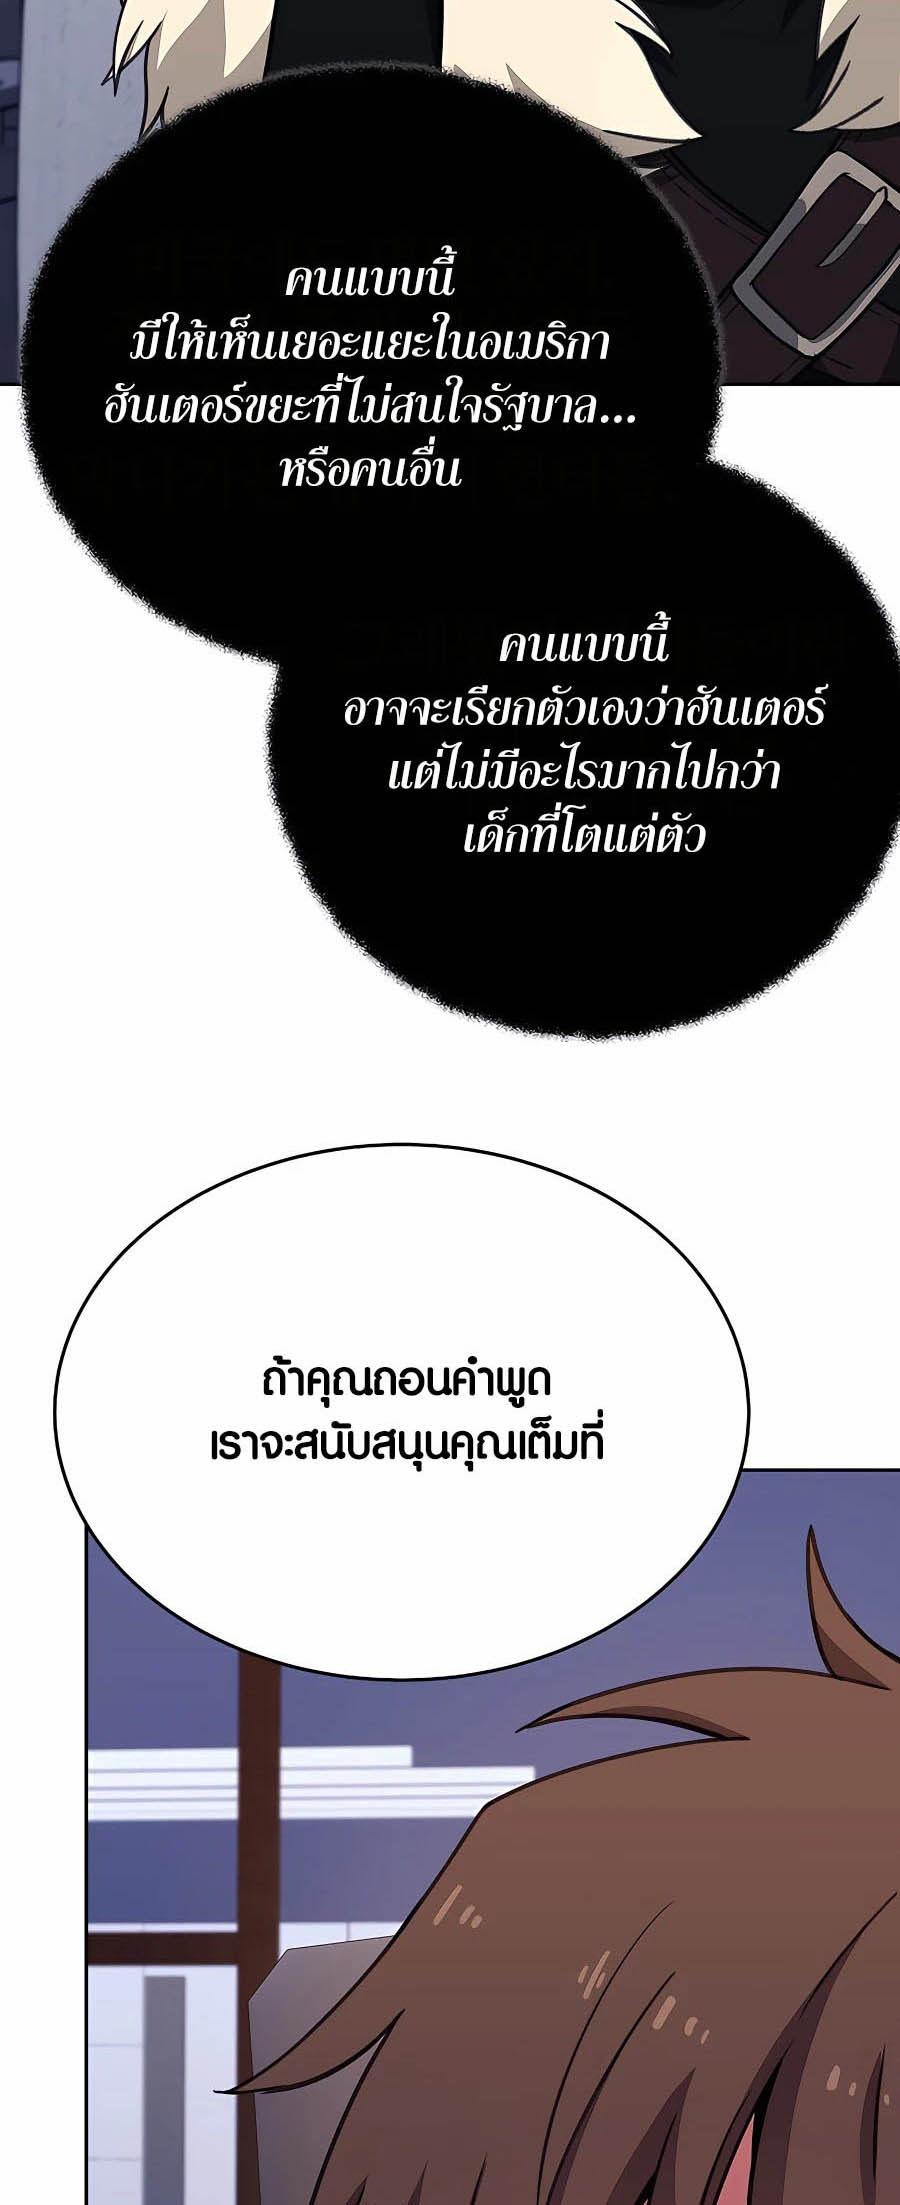 à¸­à¹ˆà¸²à¸™à¸¡à¸±à¸™à¸®à¸§à¸² à¹€à¸£à¸·à¹ˆà¸­à¸‡ The Part Time Land of the Gods 56 20